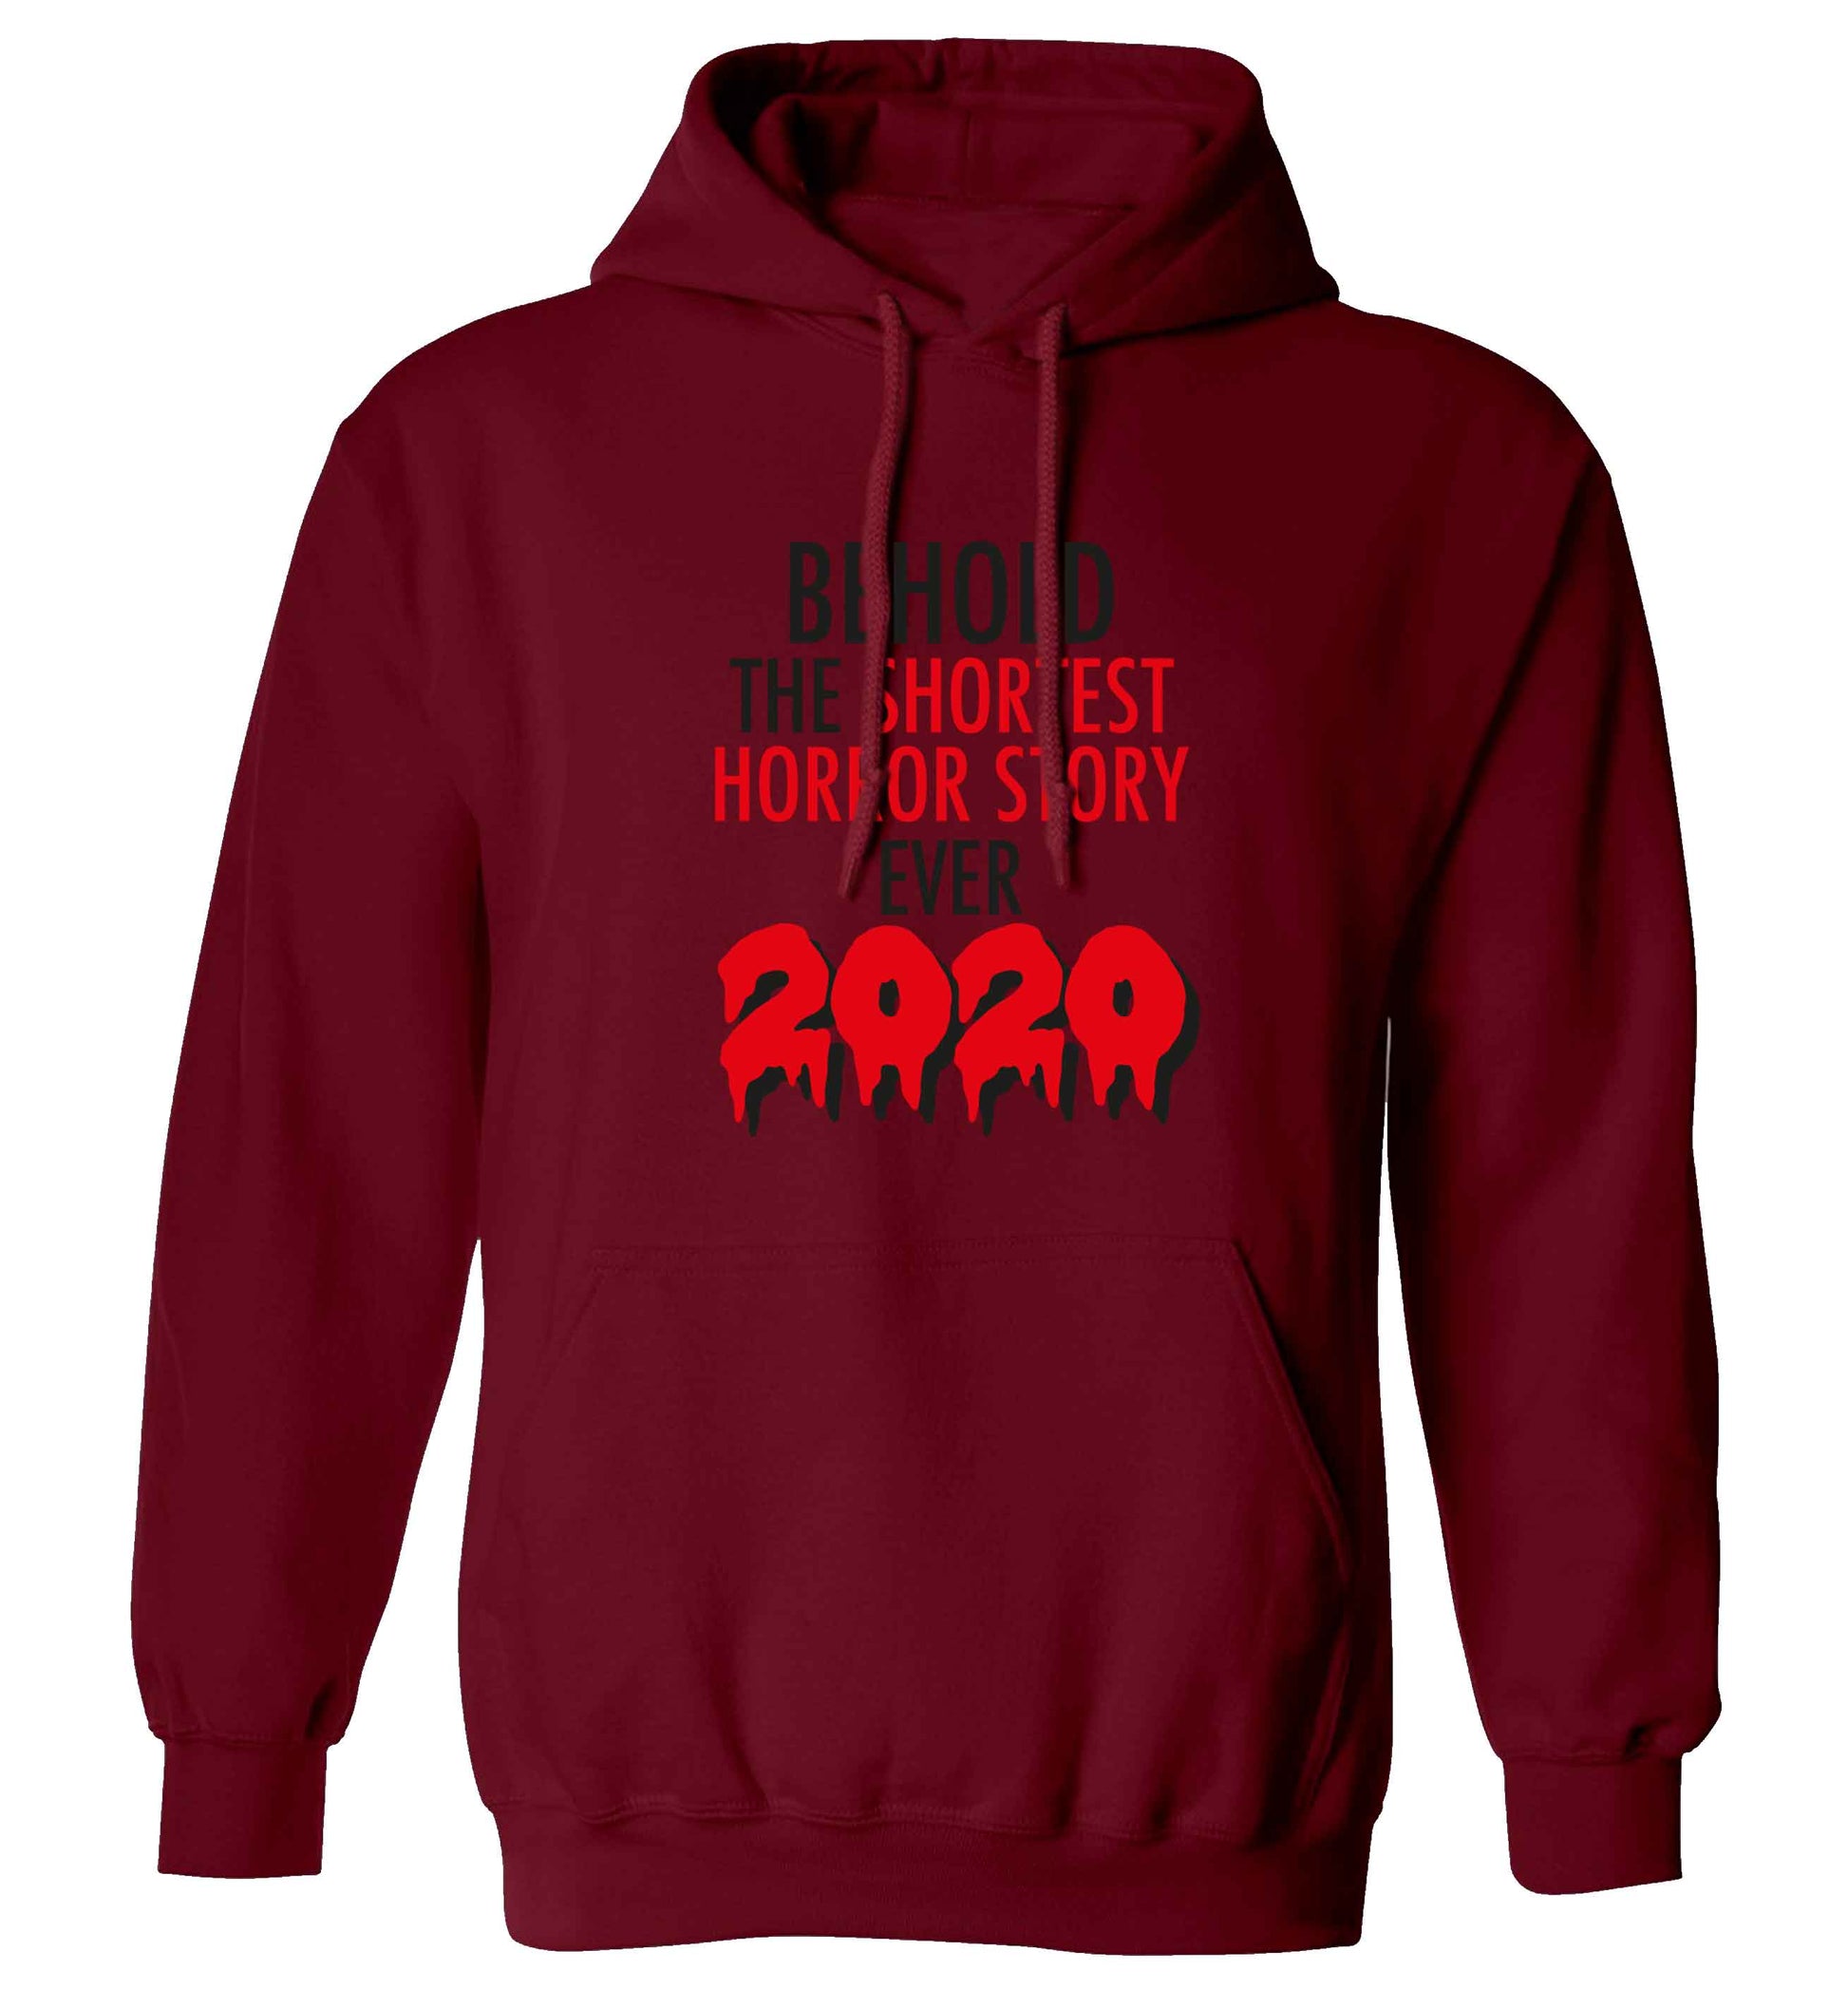 Shortest horror story ever 2020 adults unisex maroon hoodie 2XL